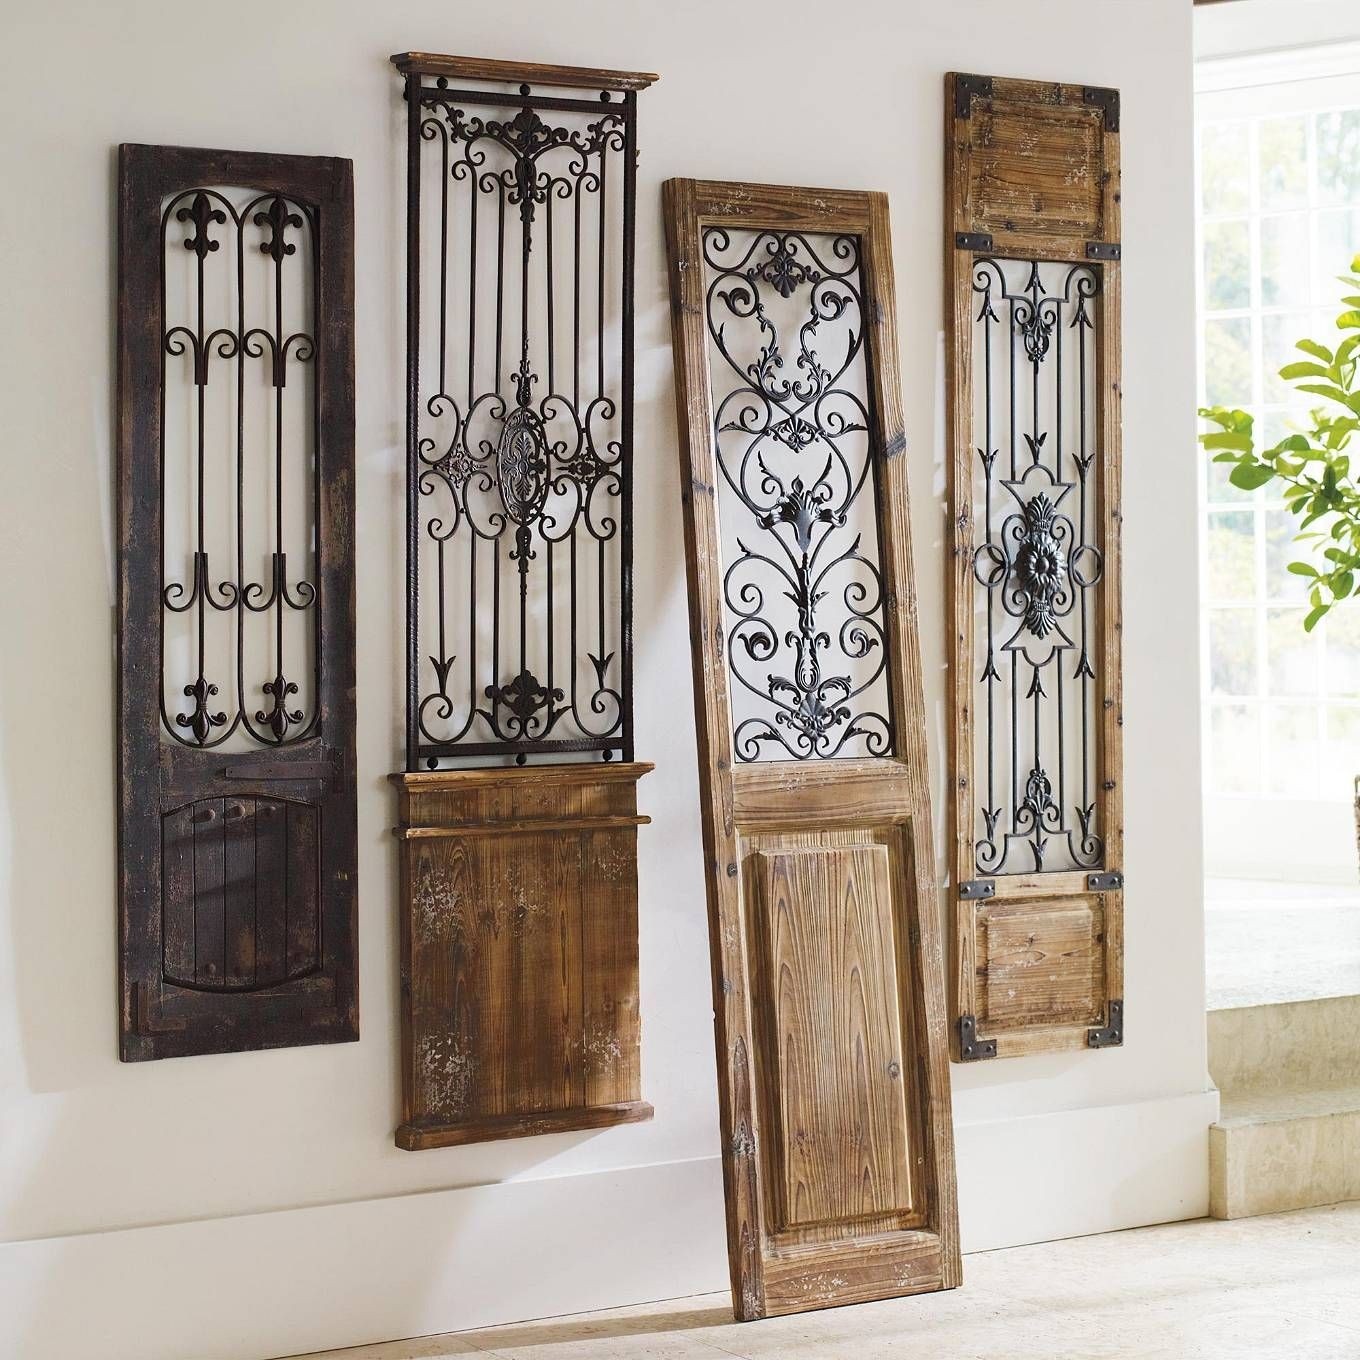 Wood and wrought iron headboards